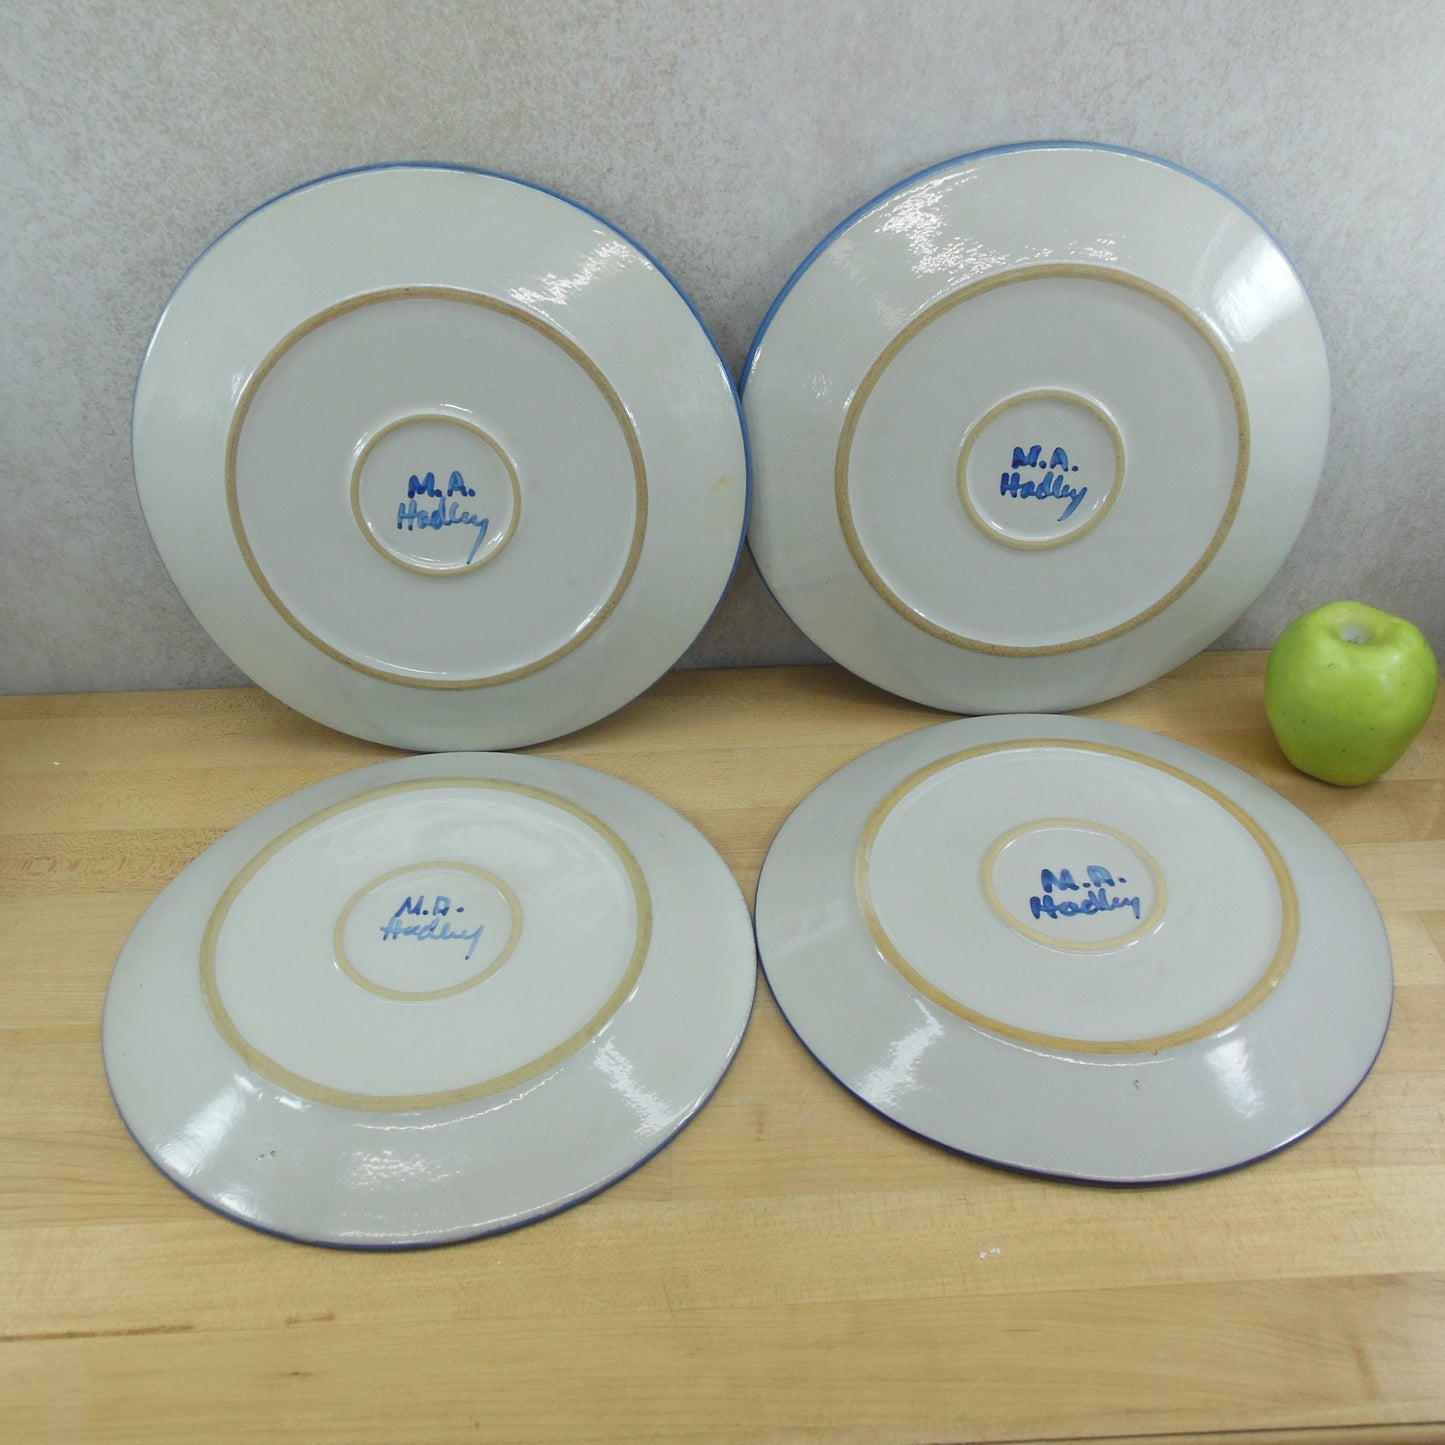 M.A. Hadley Pottery 4 Set Dinner Plates 11" House Chicken Farmer Man Woman - Discounted signed